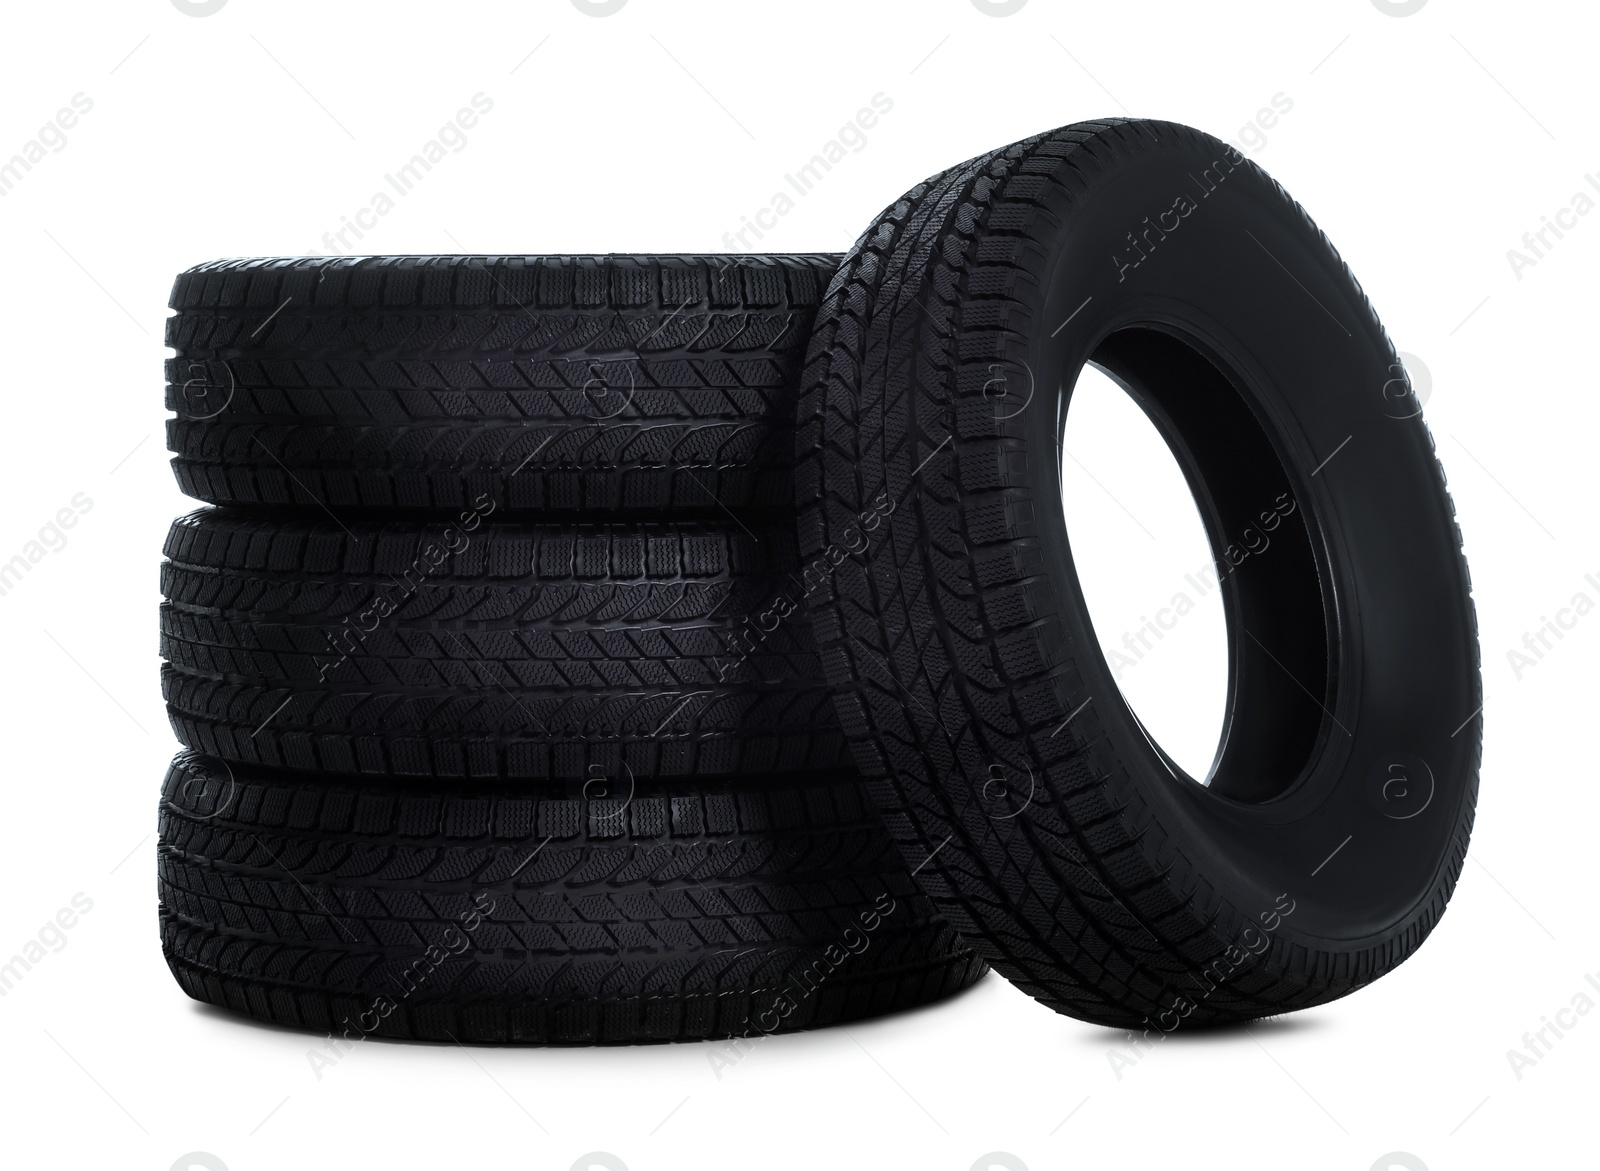 Photo of Set of new winter tires on white background